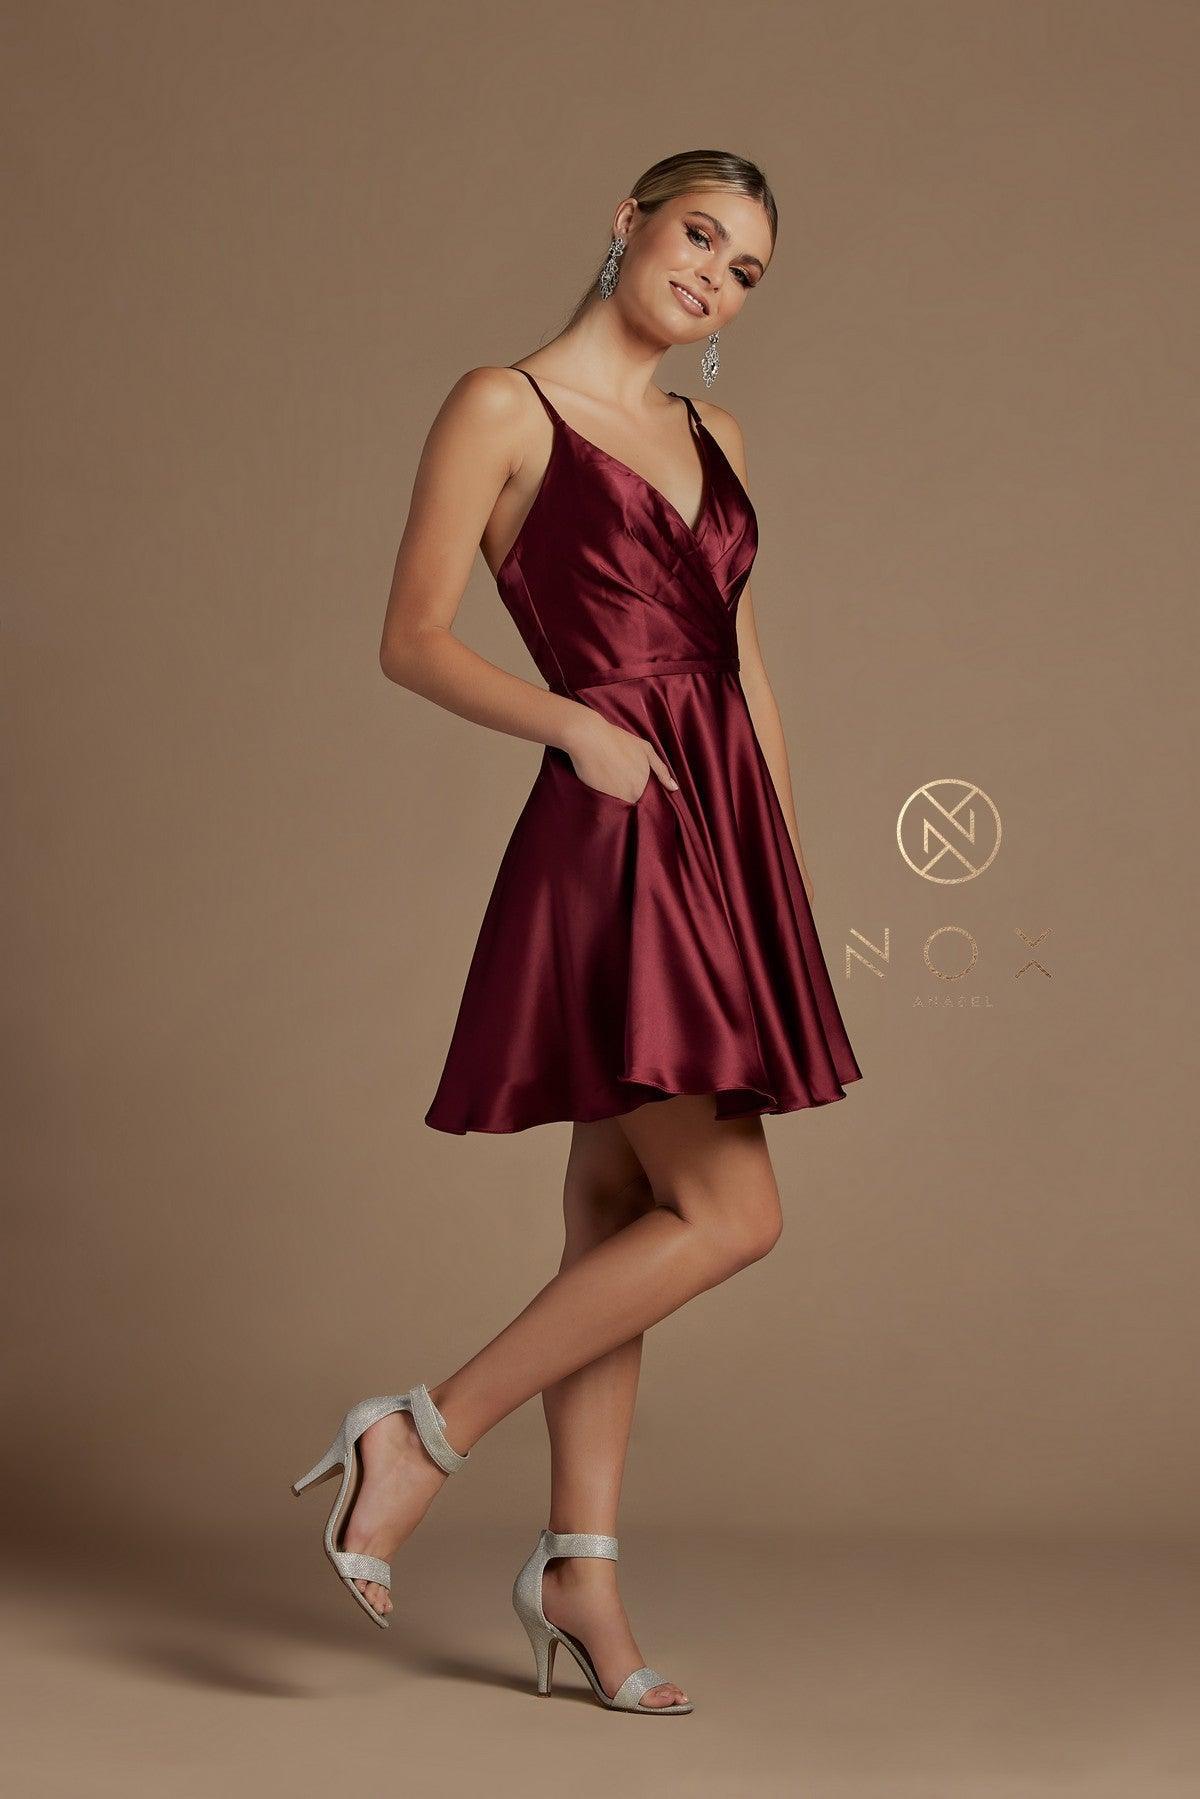 Homecoming Short Spaghetti Strap Cocktail Dress - The Dress Outlet